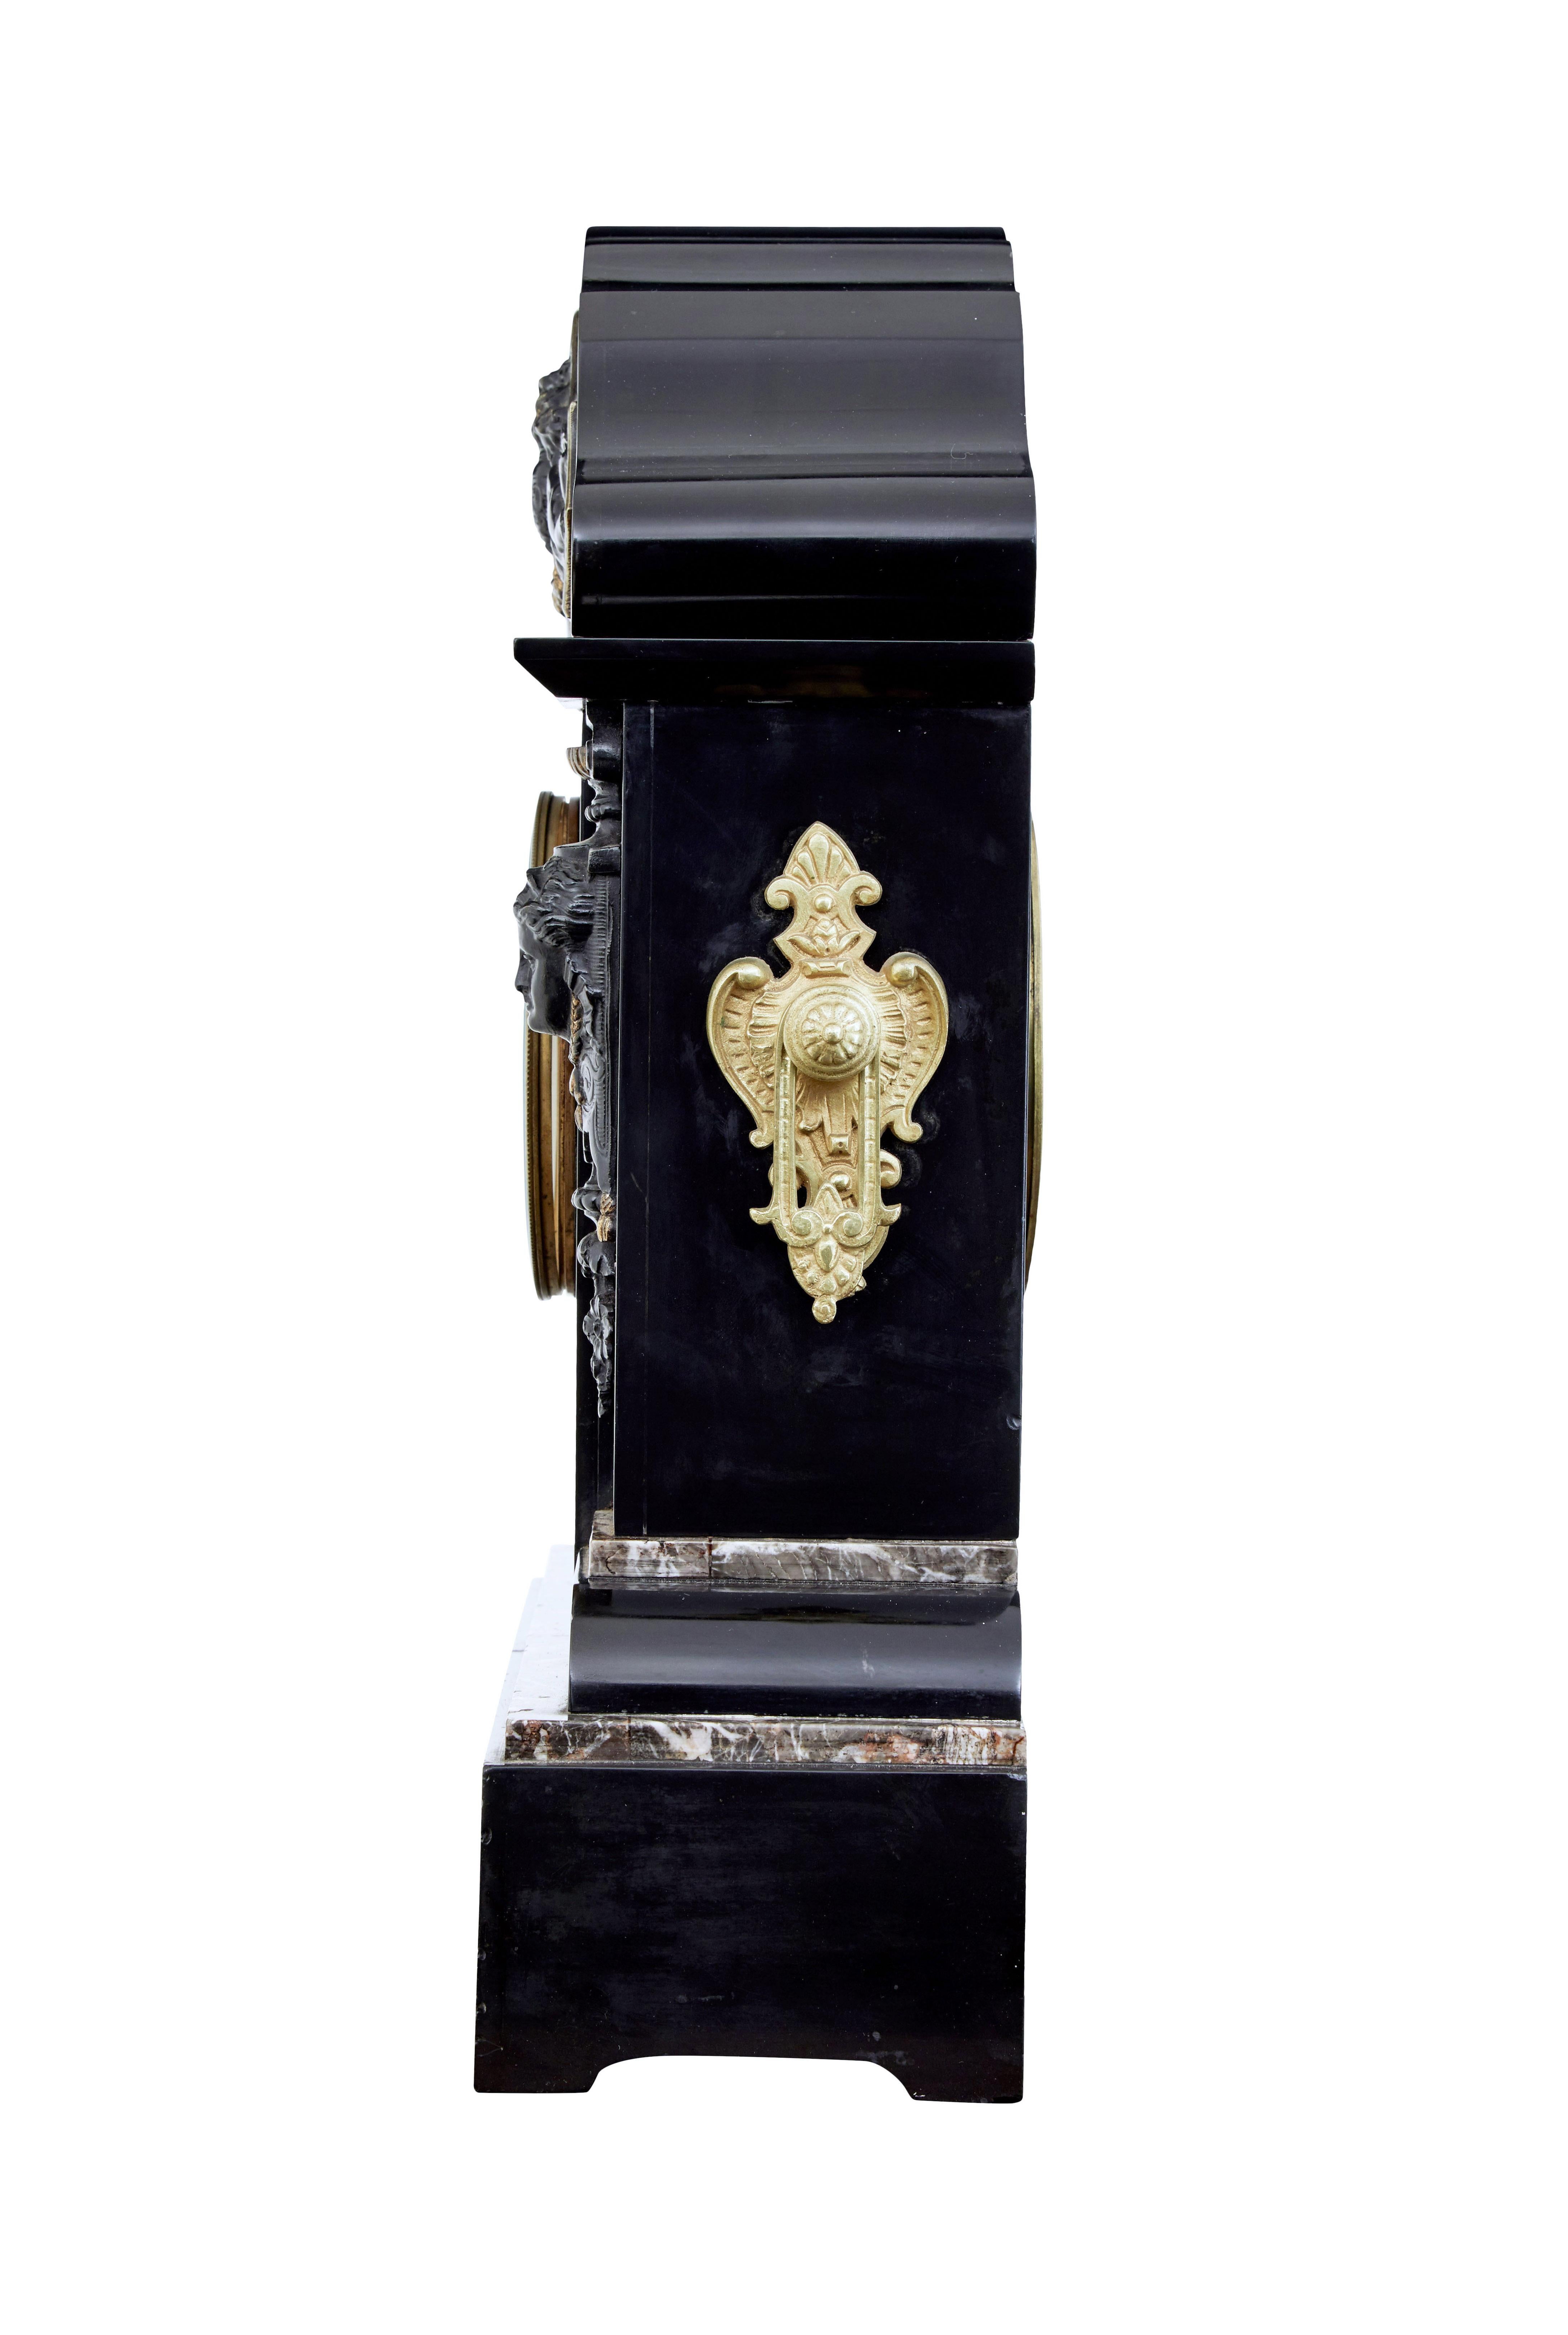 English High Victorian inlaid black marble mantel clock For Sale